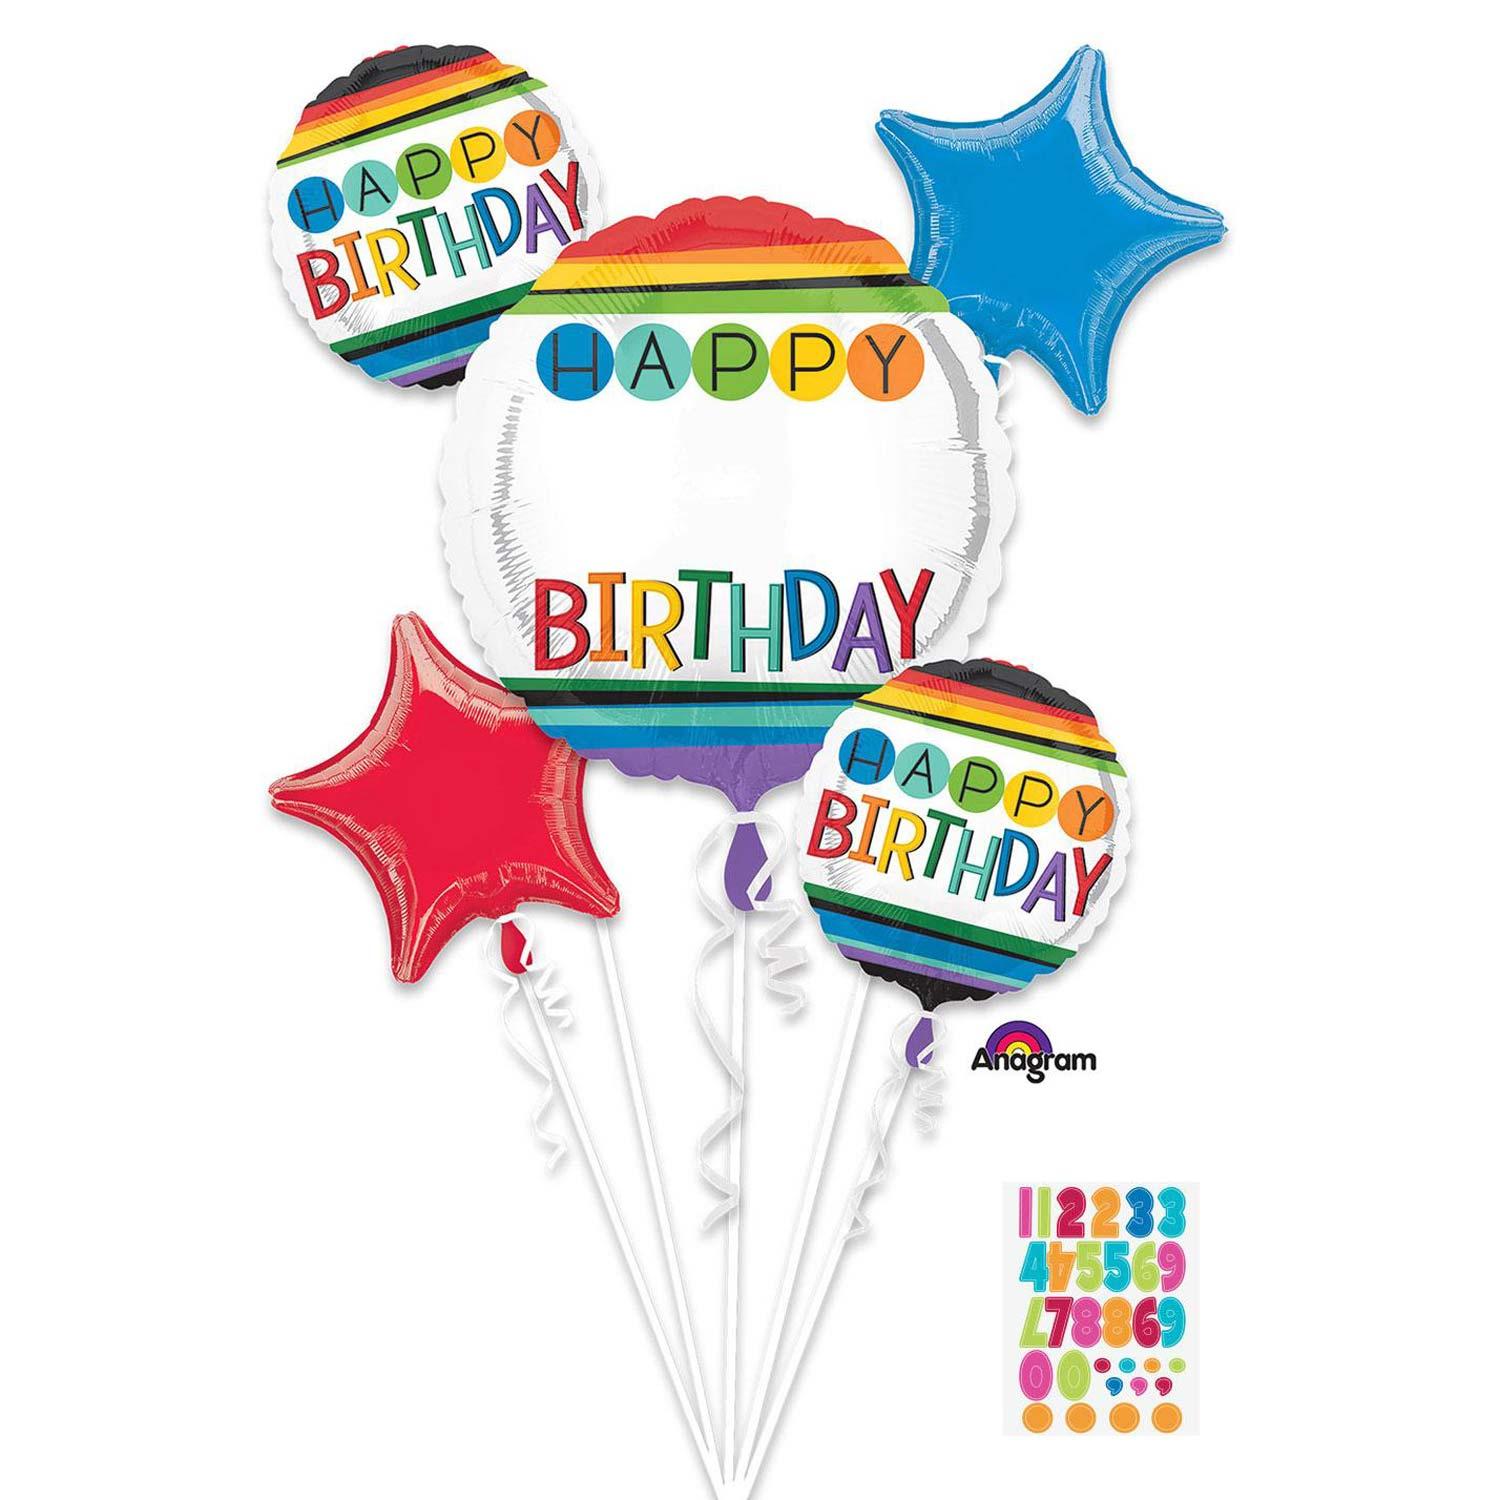 Rainbow Birthday Personalize It Balloon Bouquet 5pcs Balloons & Streamers - Party Centre